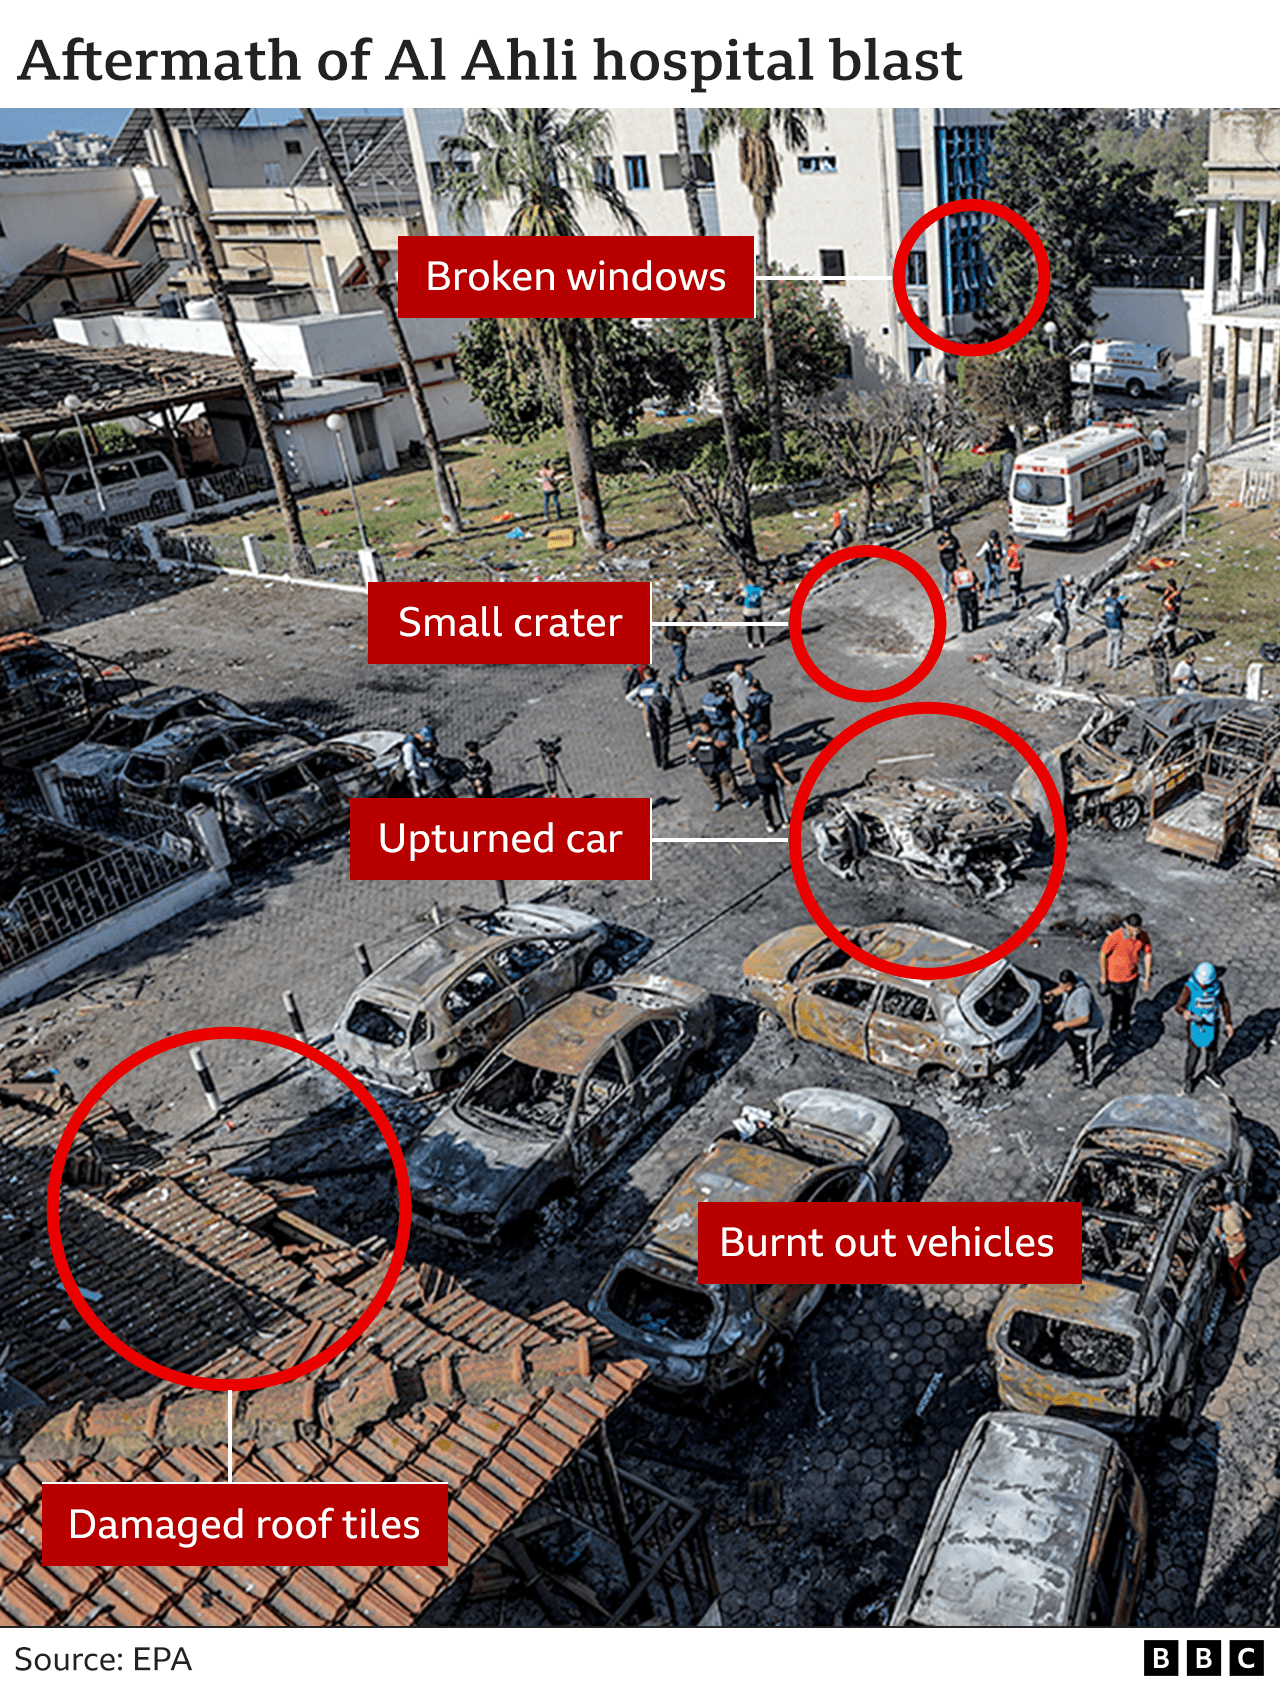 An annotated graphic of damage at the hospital